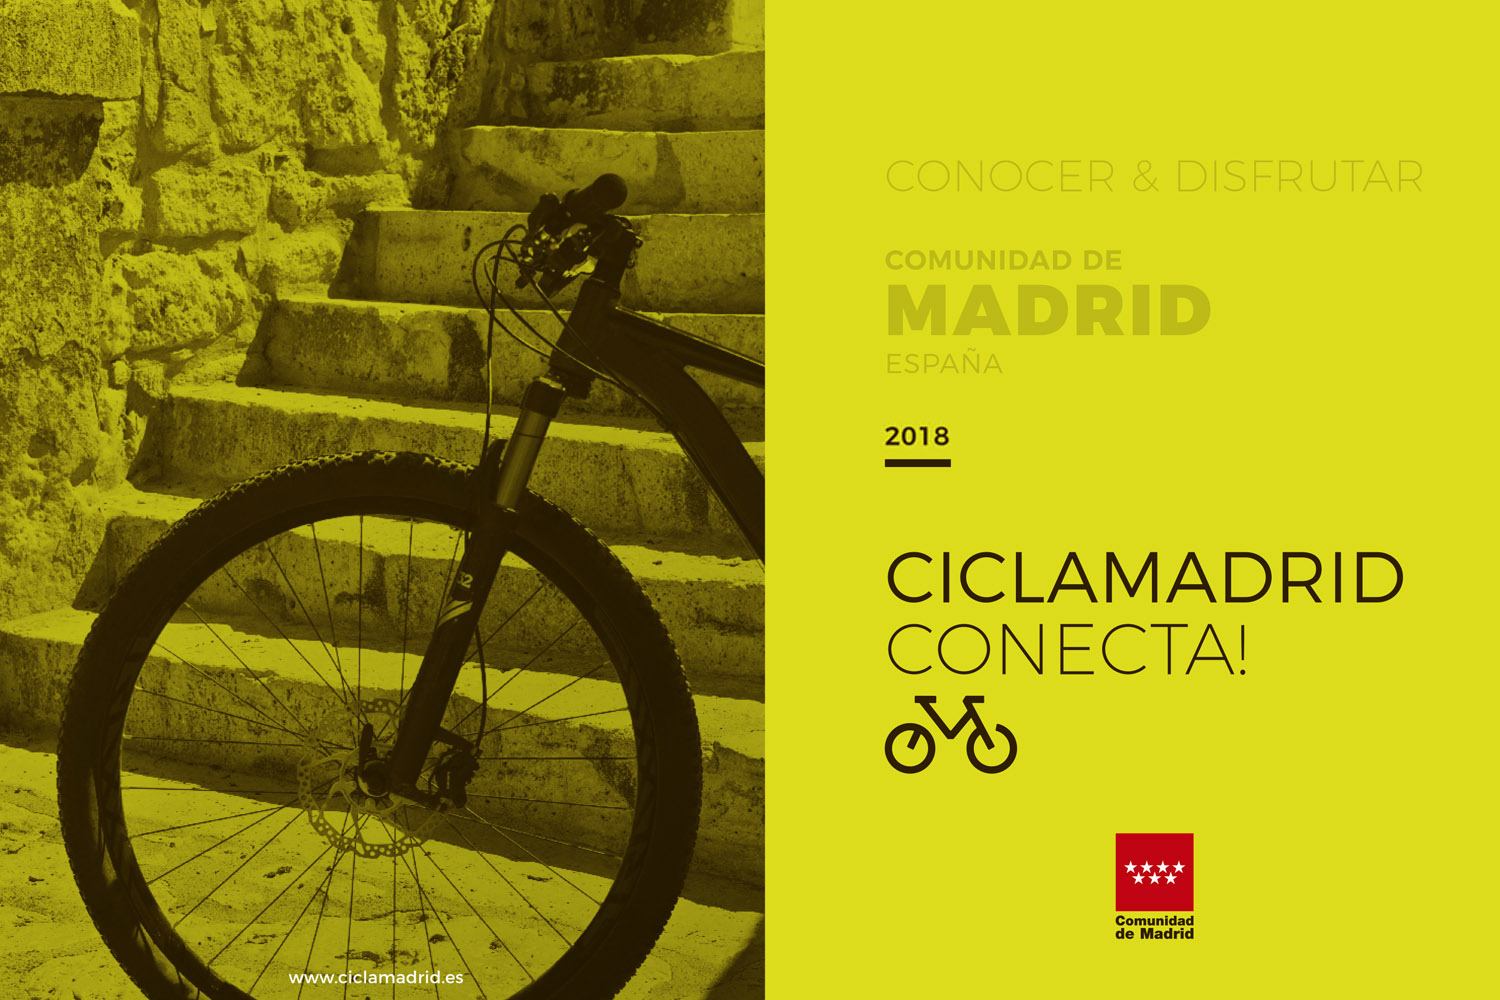 Bicycle touring around Madrid, pedal their villages and landscapes